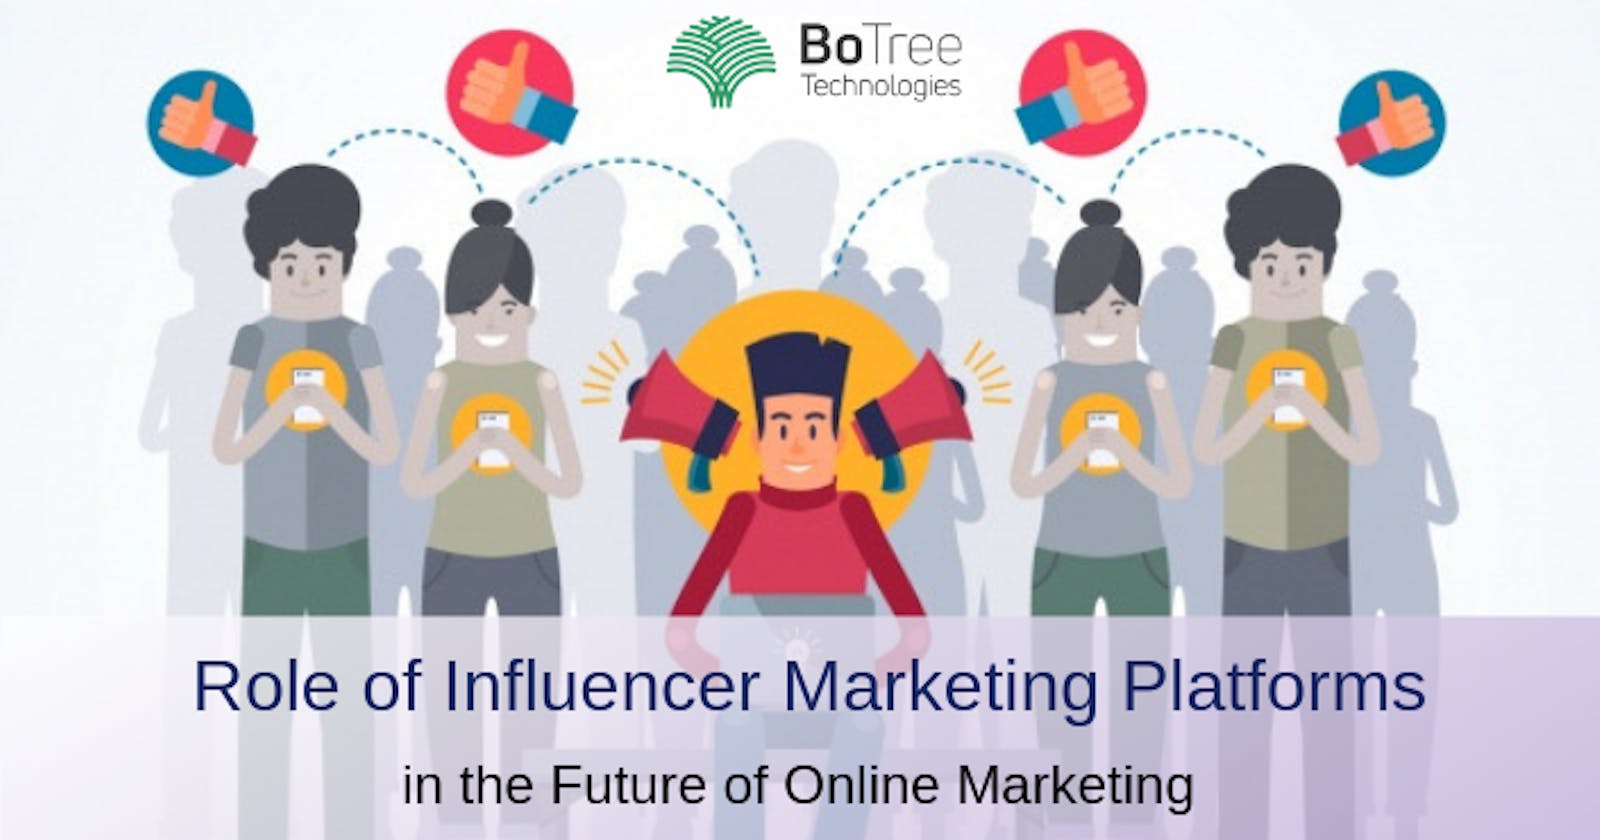 Role of Influencer Marketing Platforms in the Future of Online Marketing